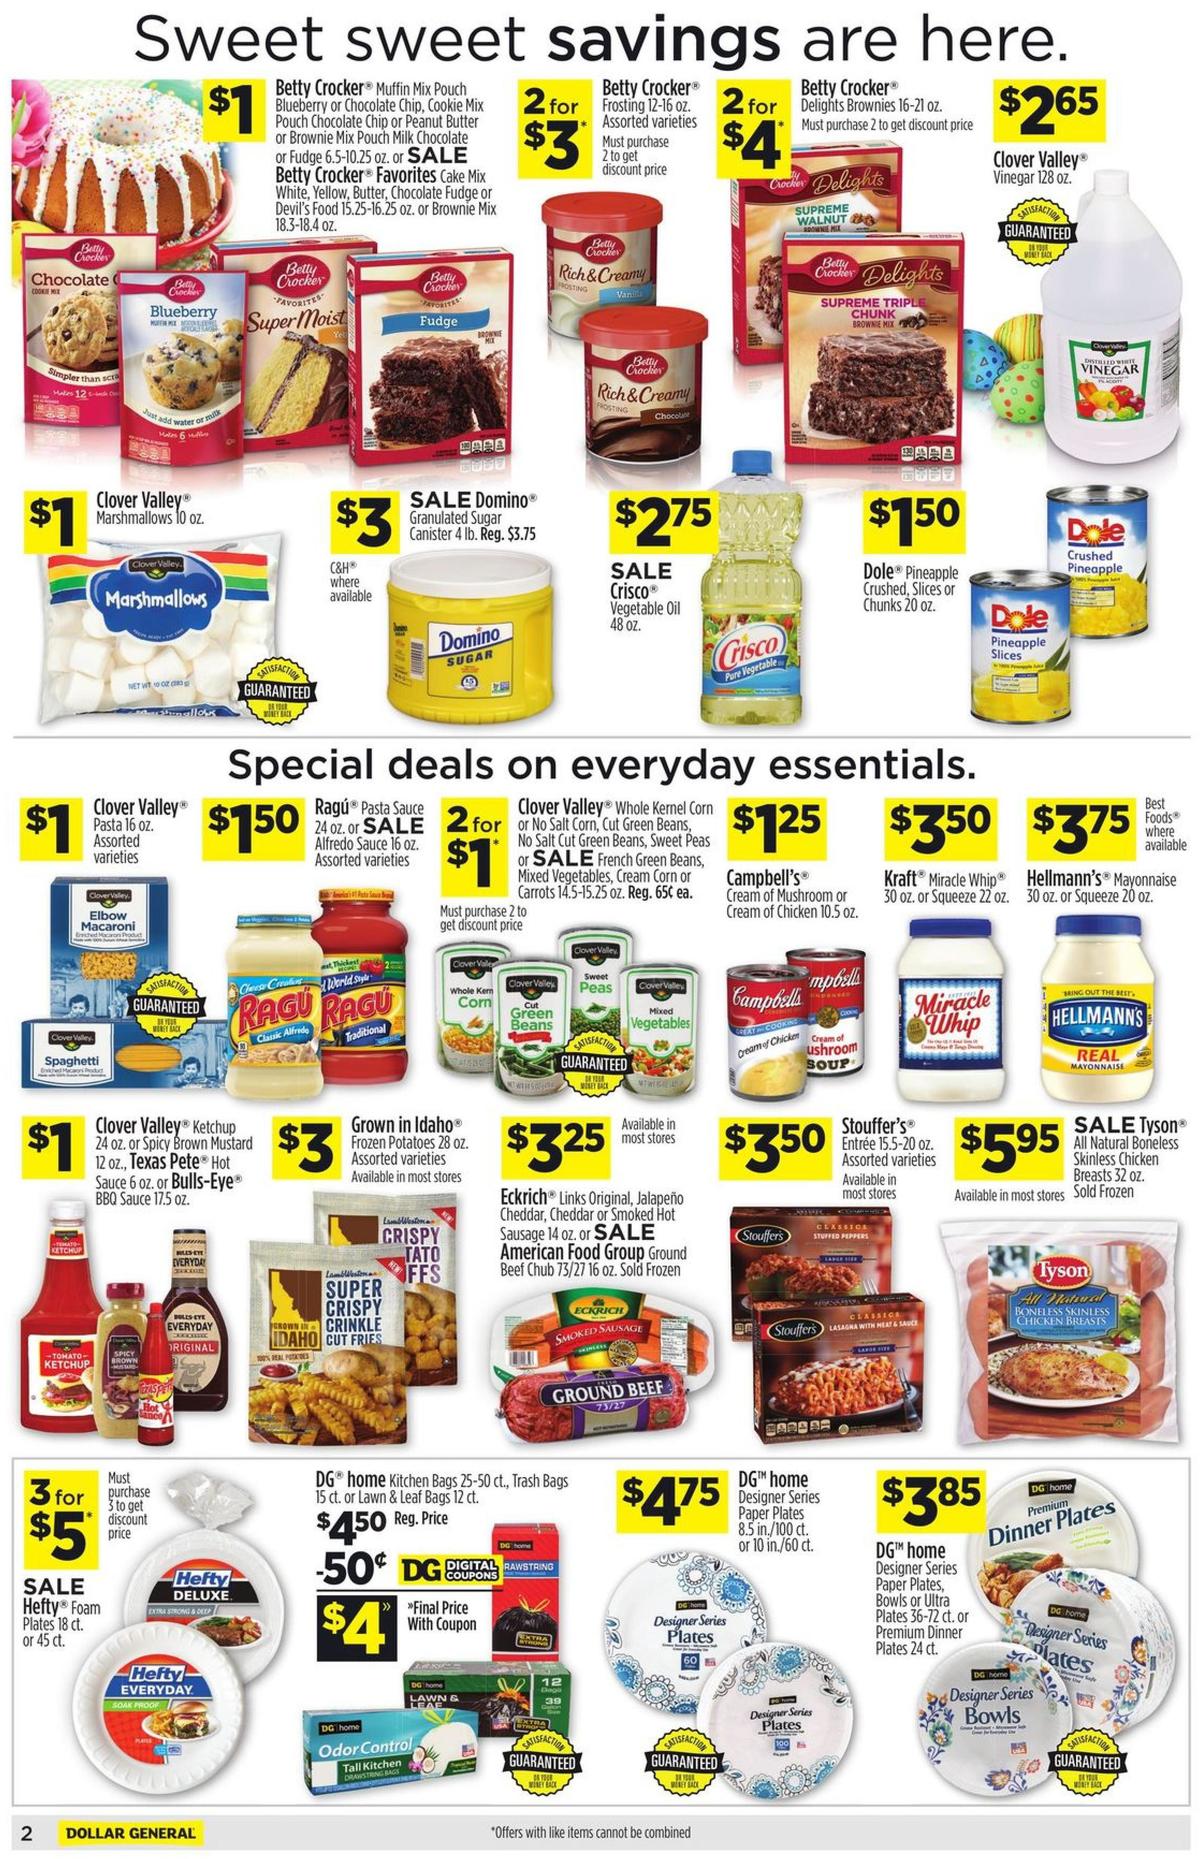 Dollar General Weekly Ad from March 22